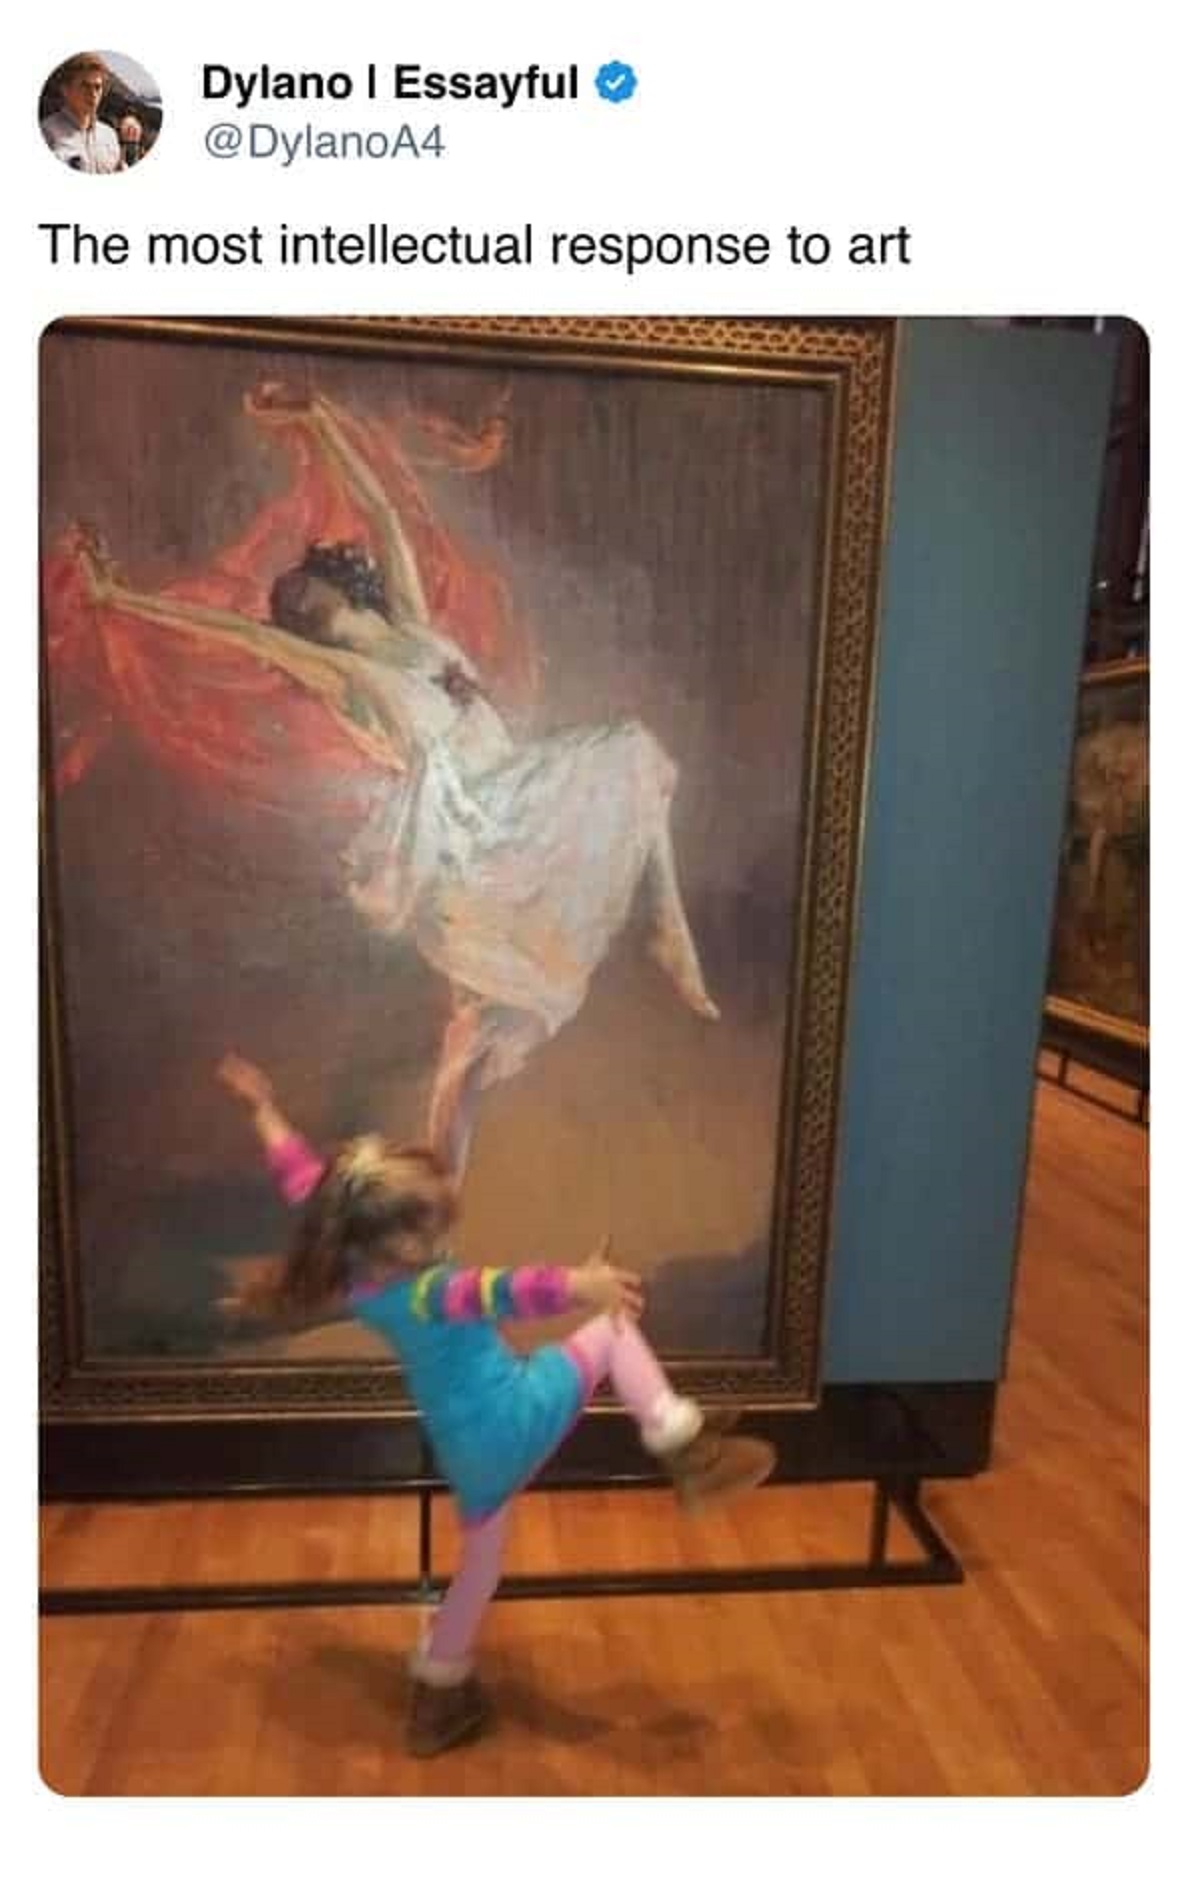 little girl dancing with painting - Dylano | Essayful The most intellectual response to art